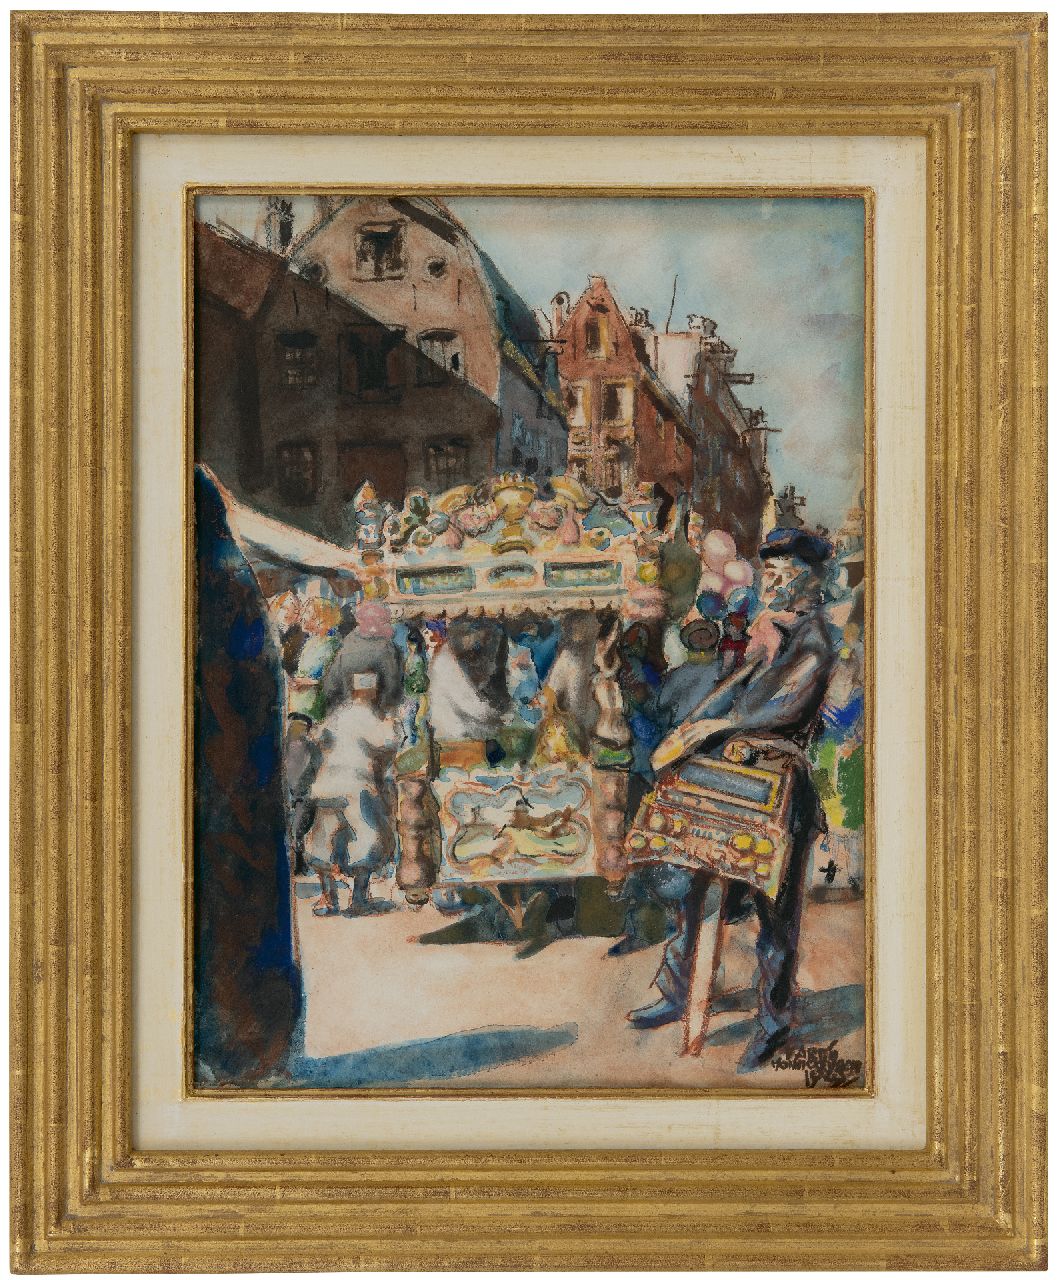 Monnickendam M.  | Martin Monnickendam, Ice cream cart and barrel organ at the Waterlooplein in Amsterdam, pastel and watercolour on paper 38.5 x 29.0 cm, signed l.r. and dated 1925